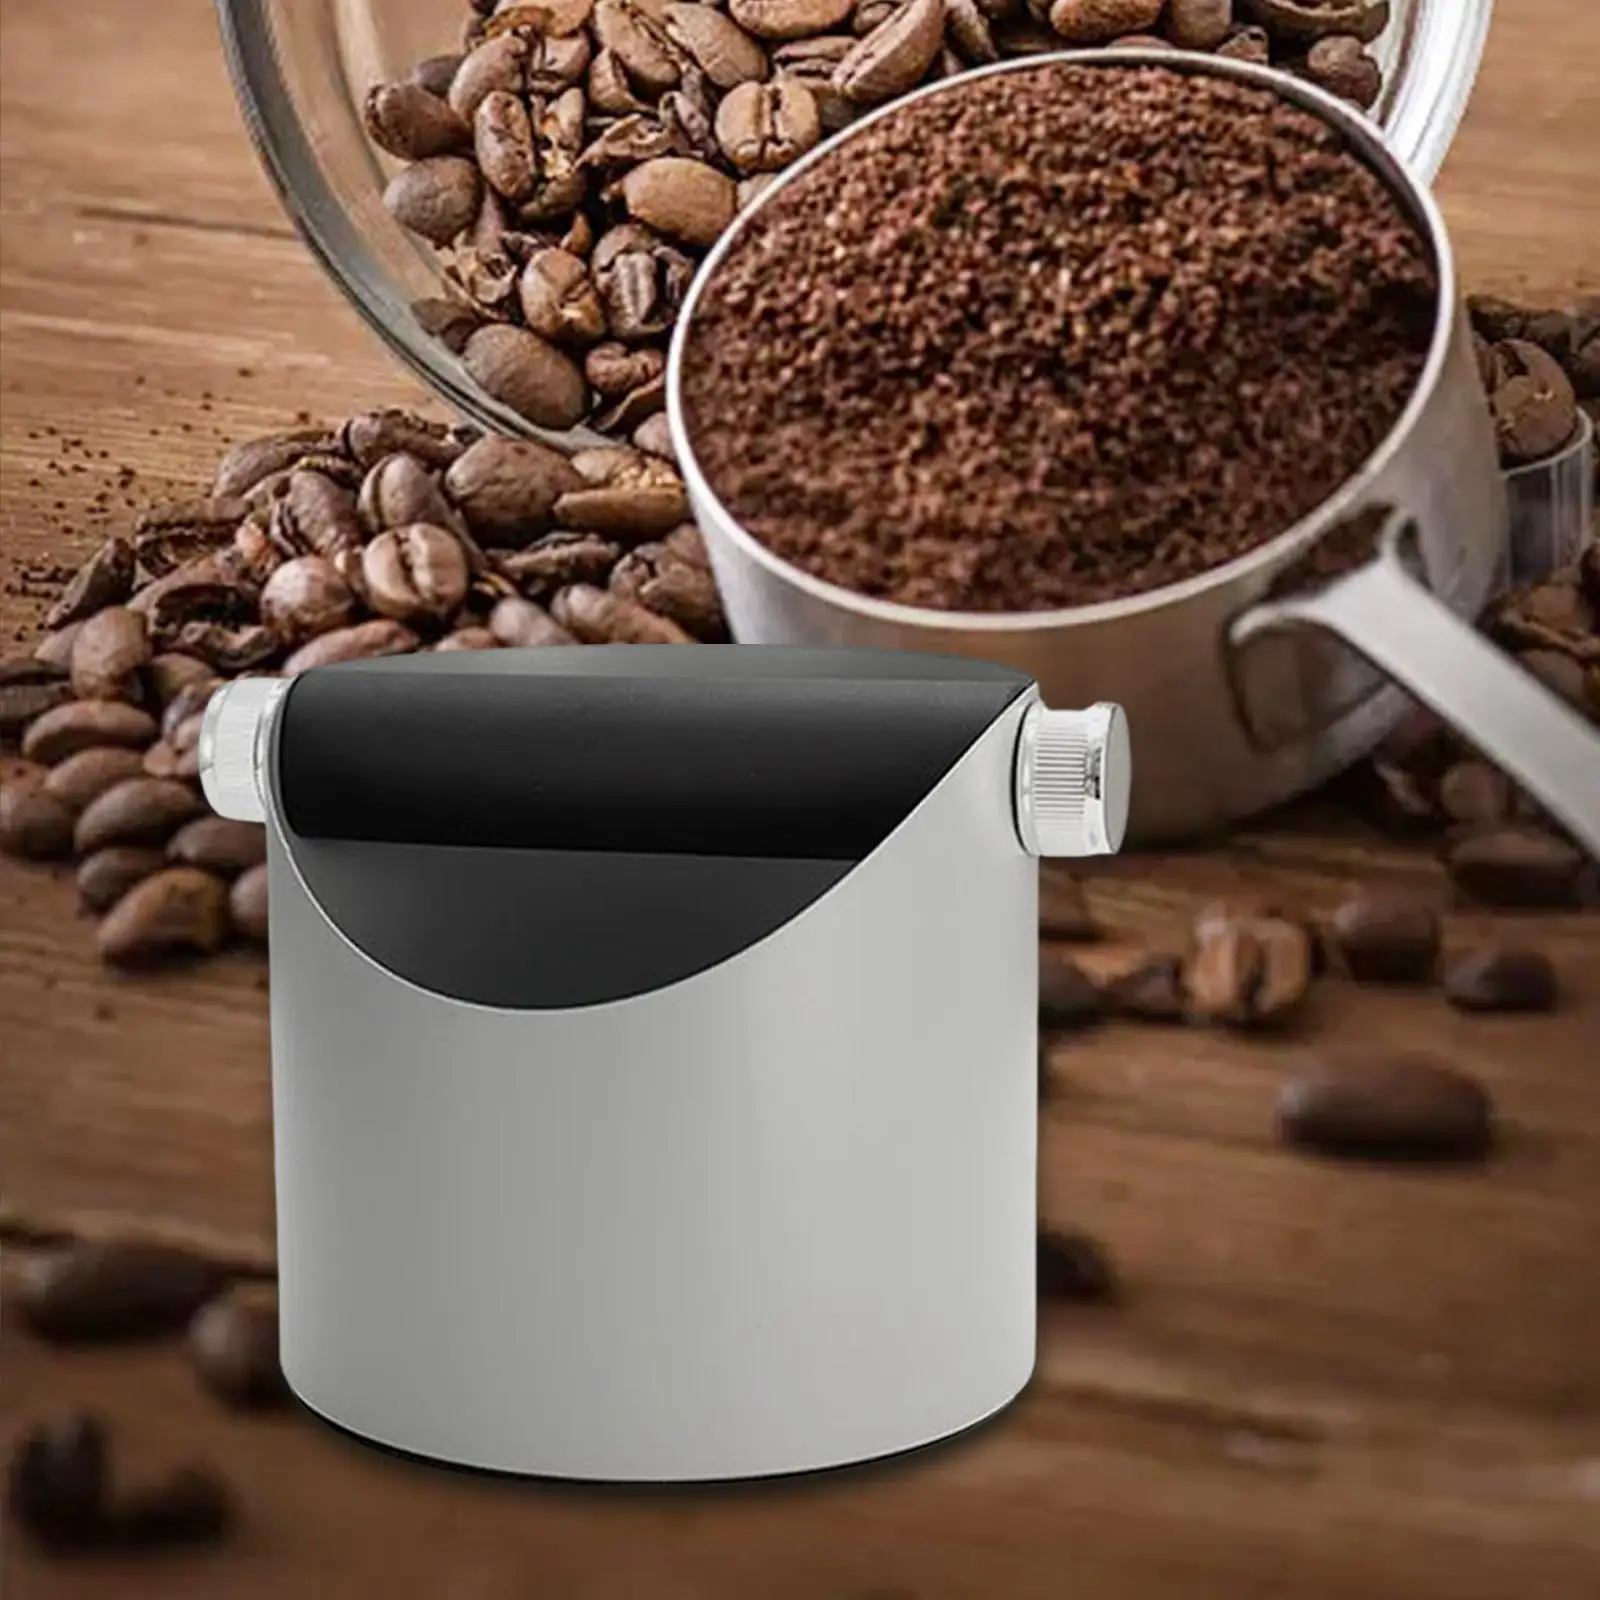 Practical Coffee Grounds Box Dump Bin Nonslip Base Pad Coffee Maker Accs Steel Container for Restaurant Bar Home